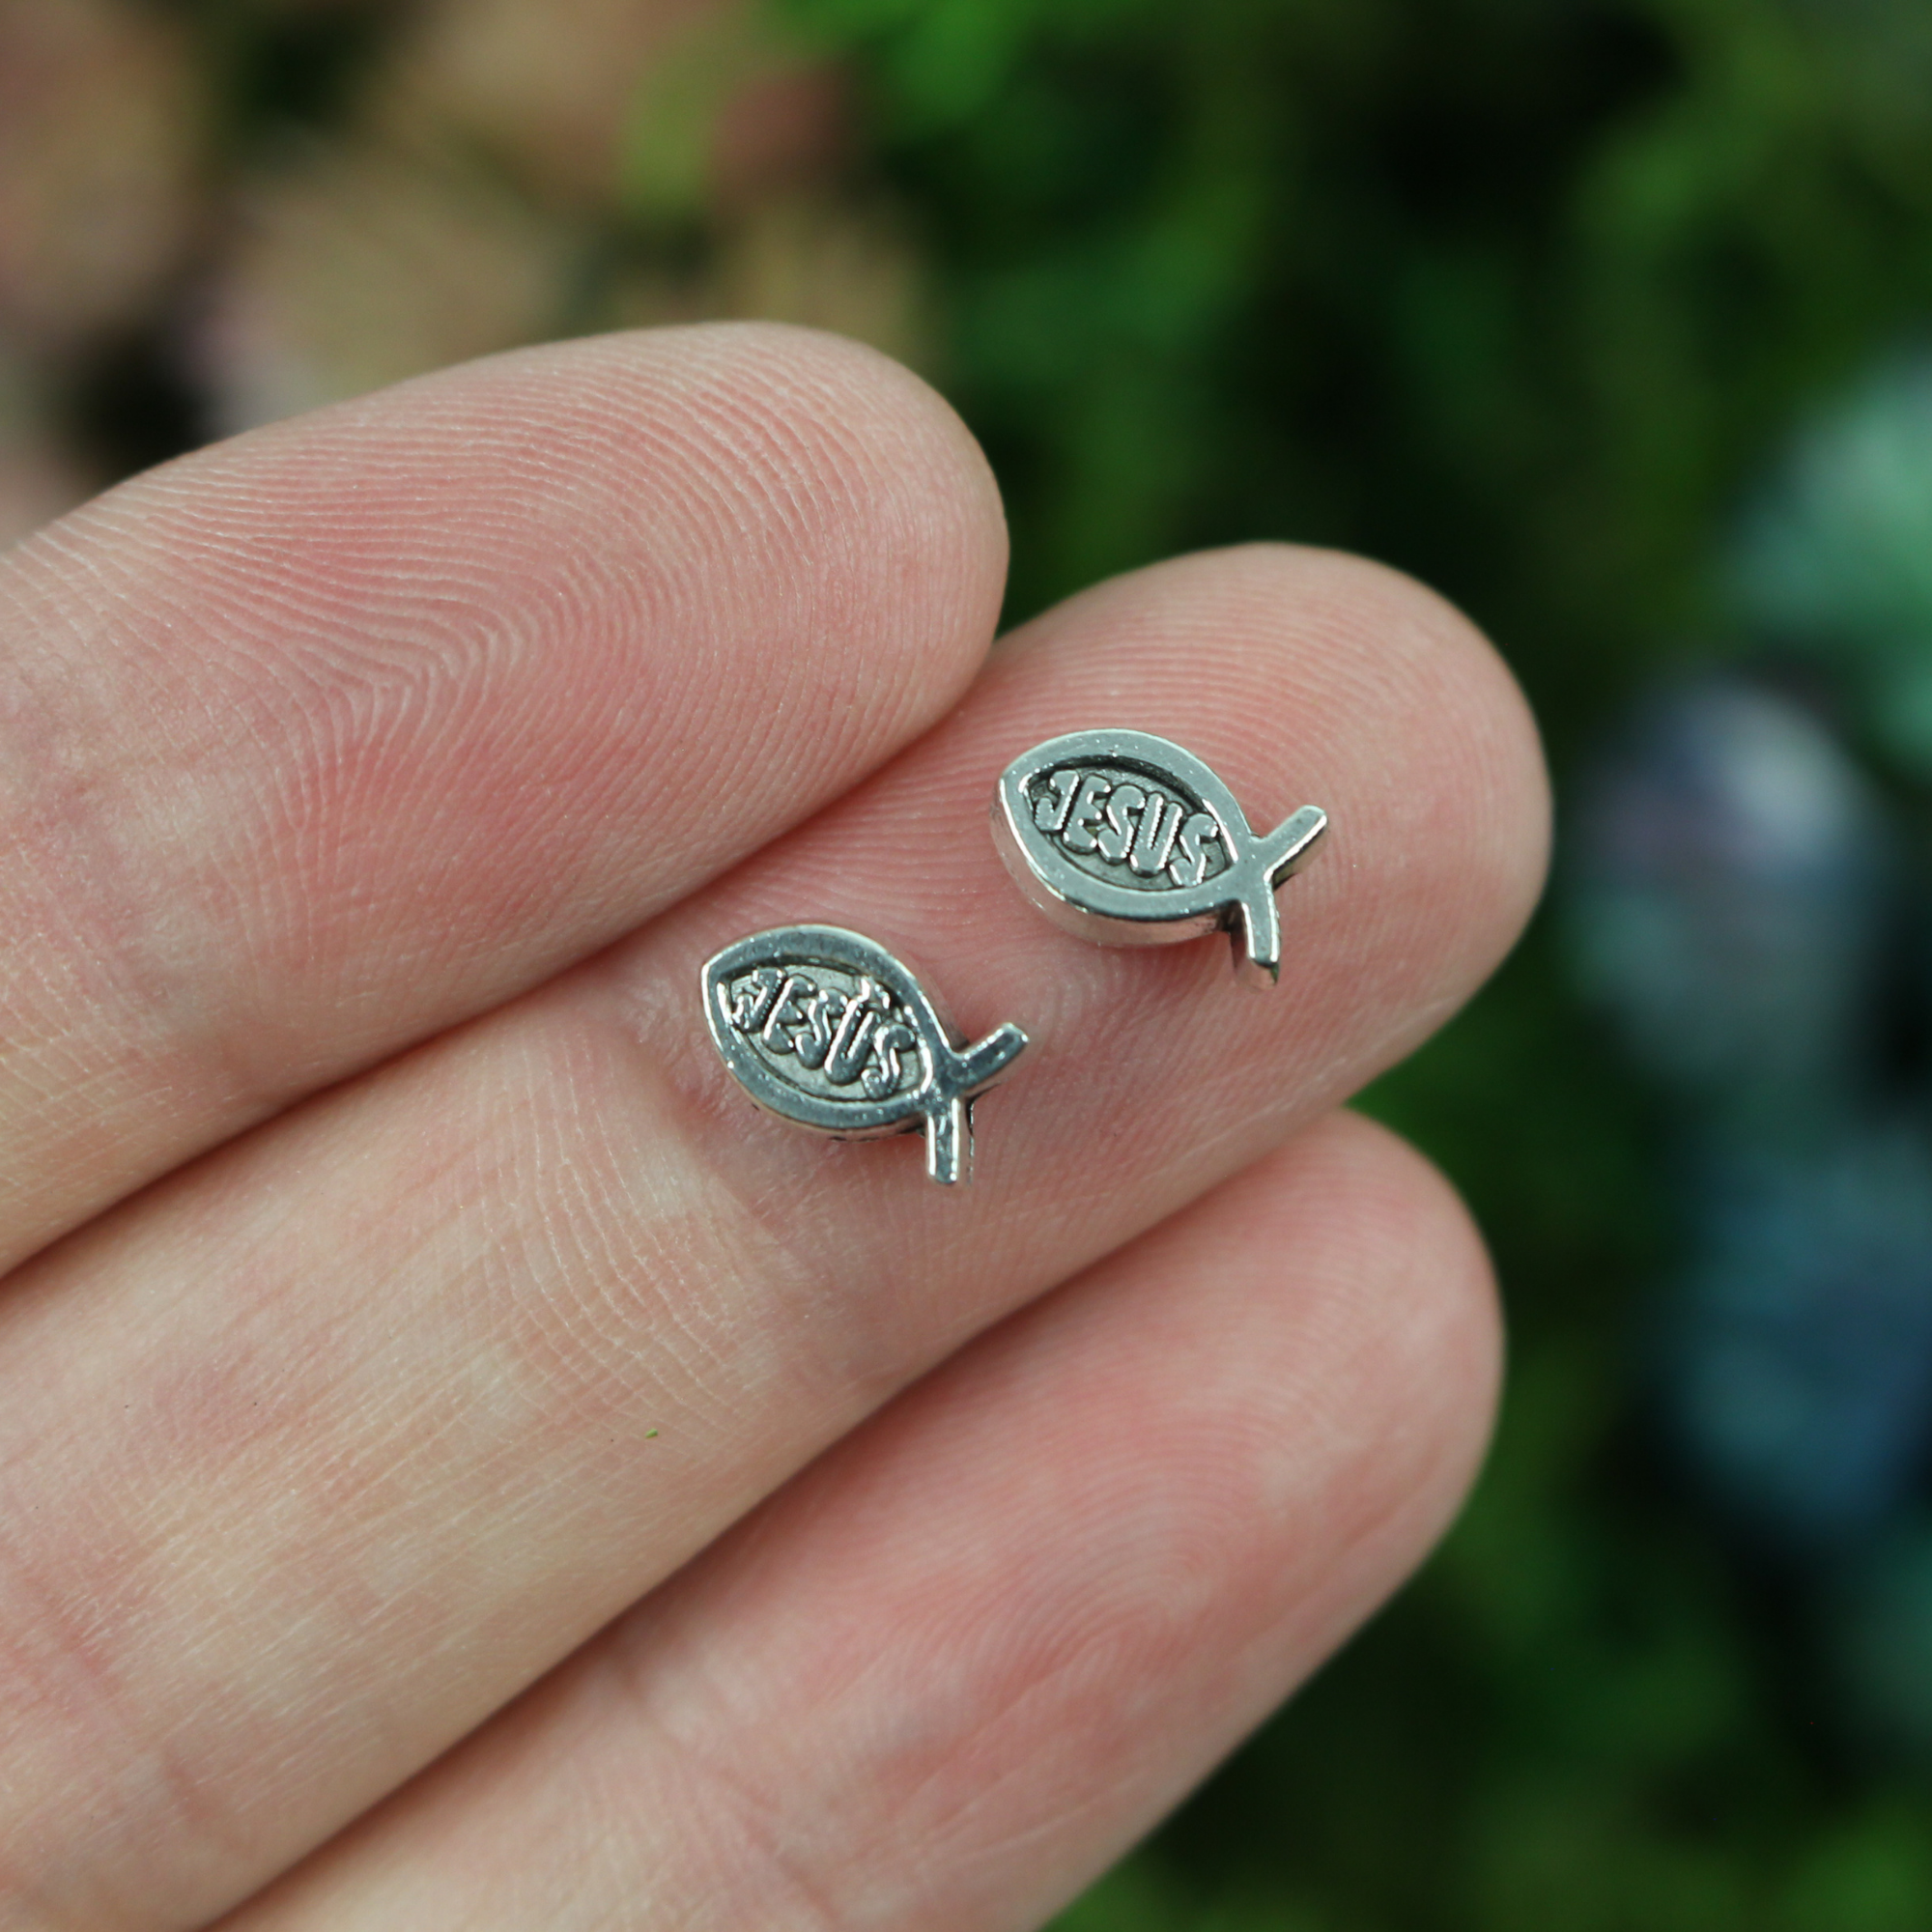 Tiny silver fish shaped beads with Jesus written on both sides, 8mmx5mm